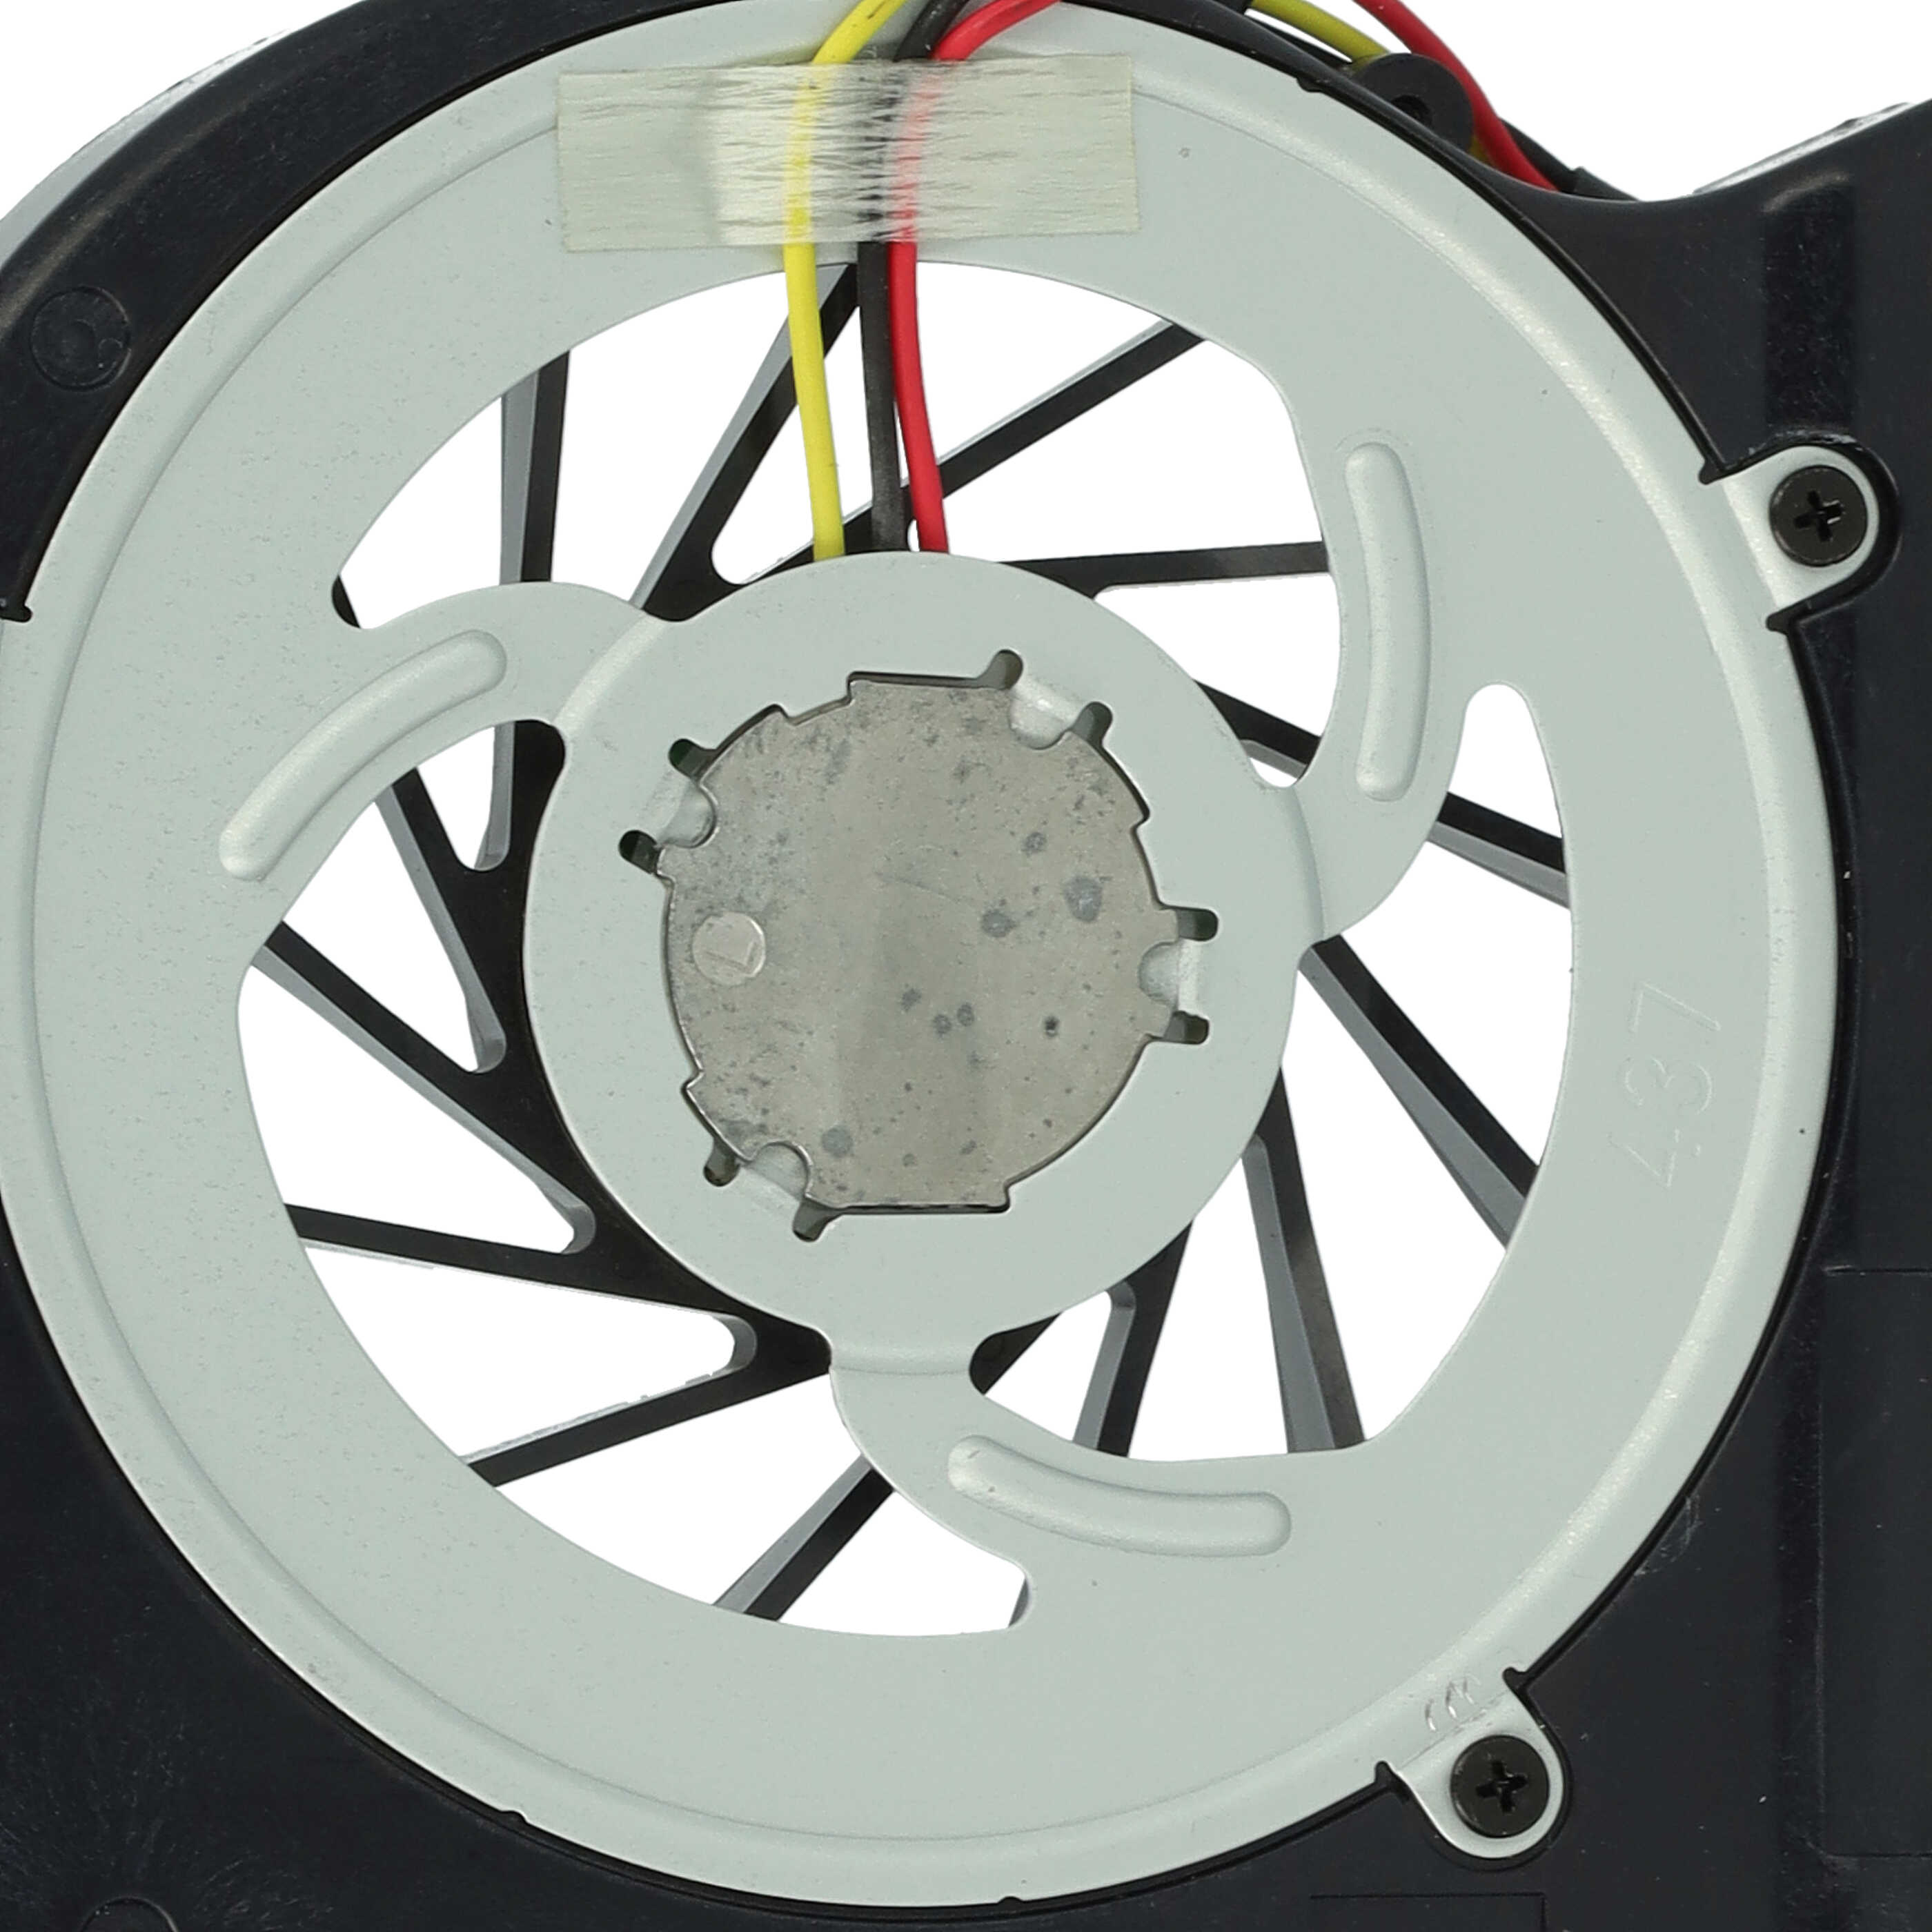 CPU / GPU Fan suitable for Sony Vaio MCF-C29BM05 Notebook 85 x 93 x 12 mm